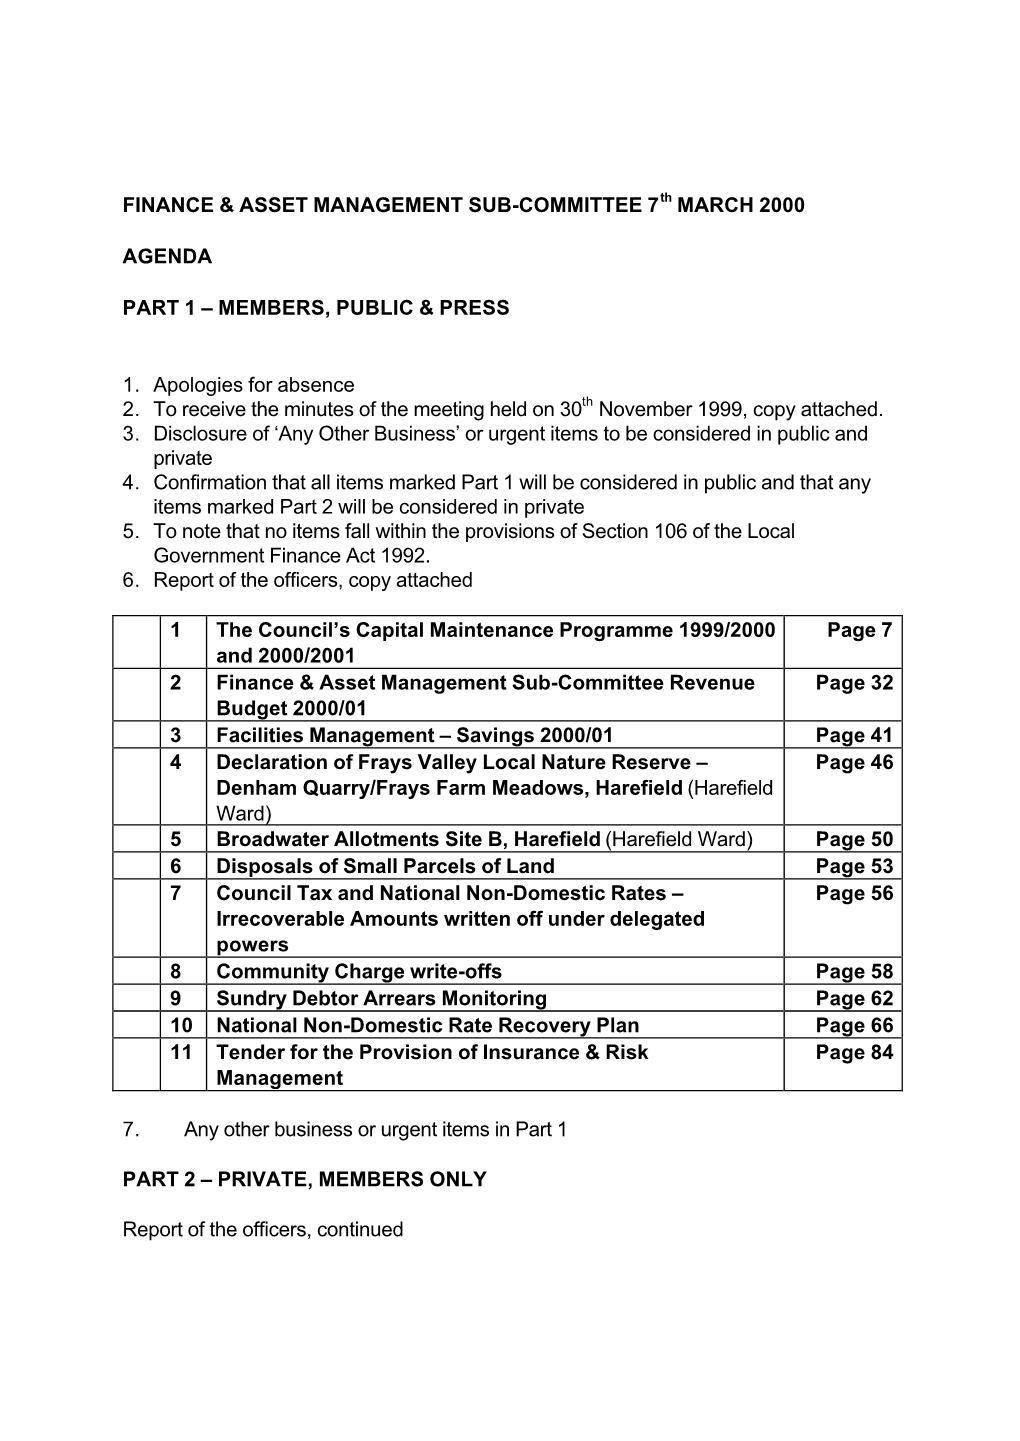 Finance & Asset Management Sub-Committee 7 March 2000